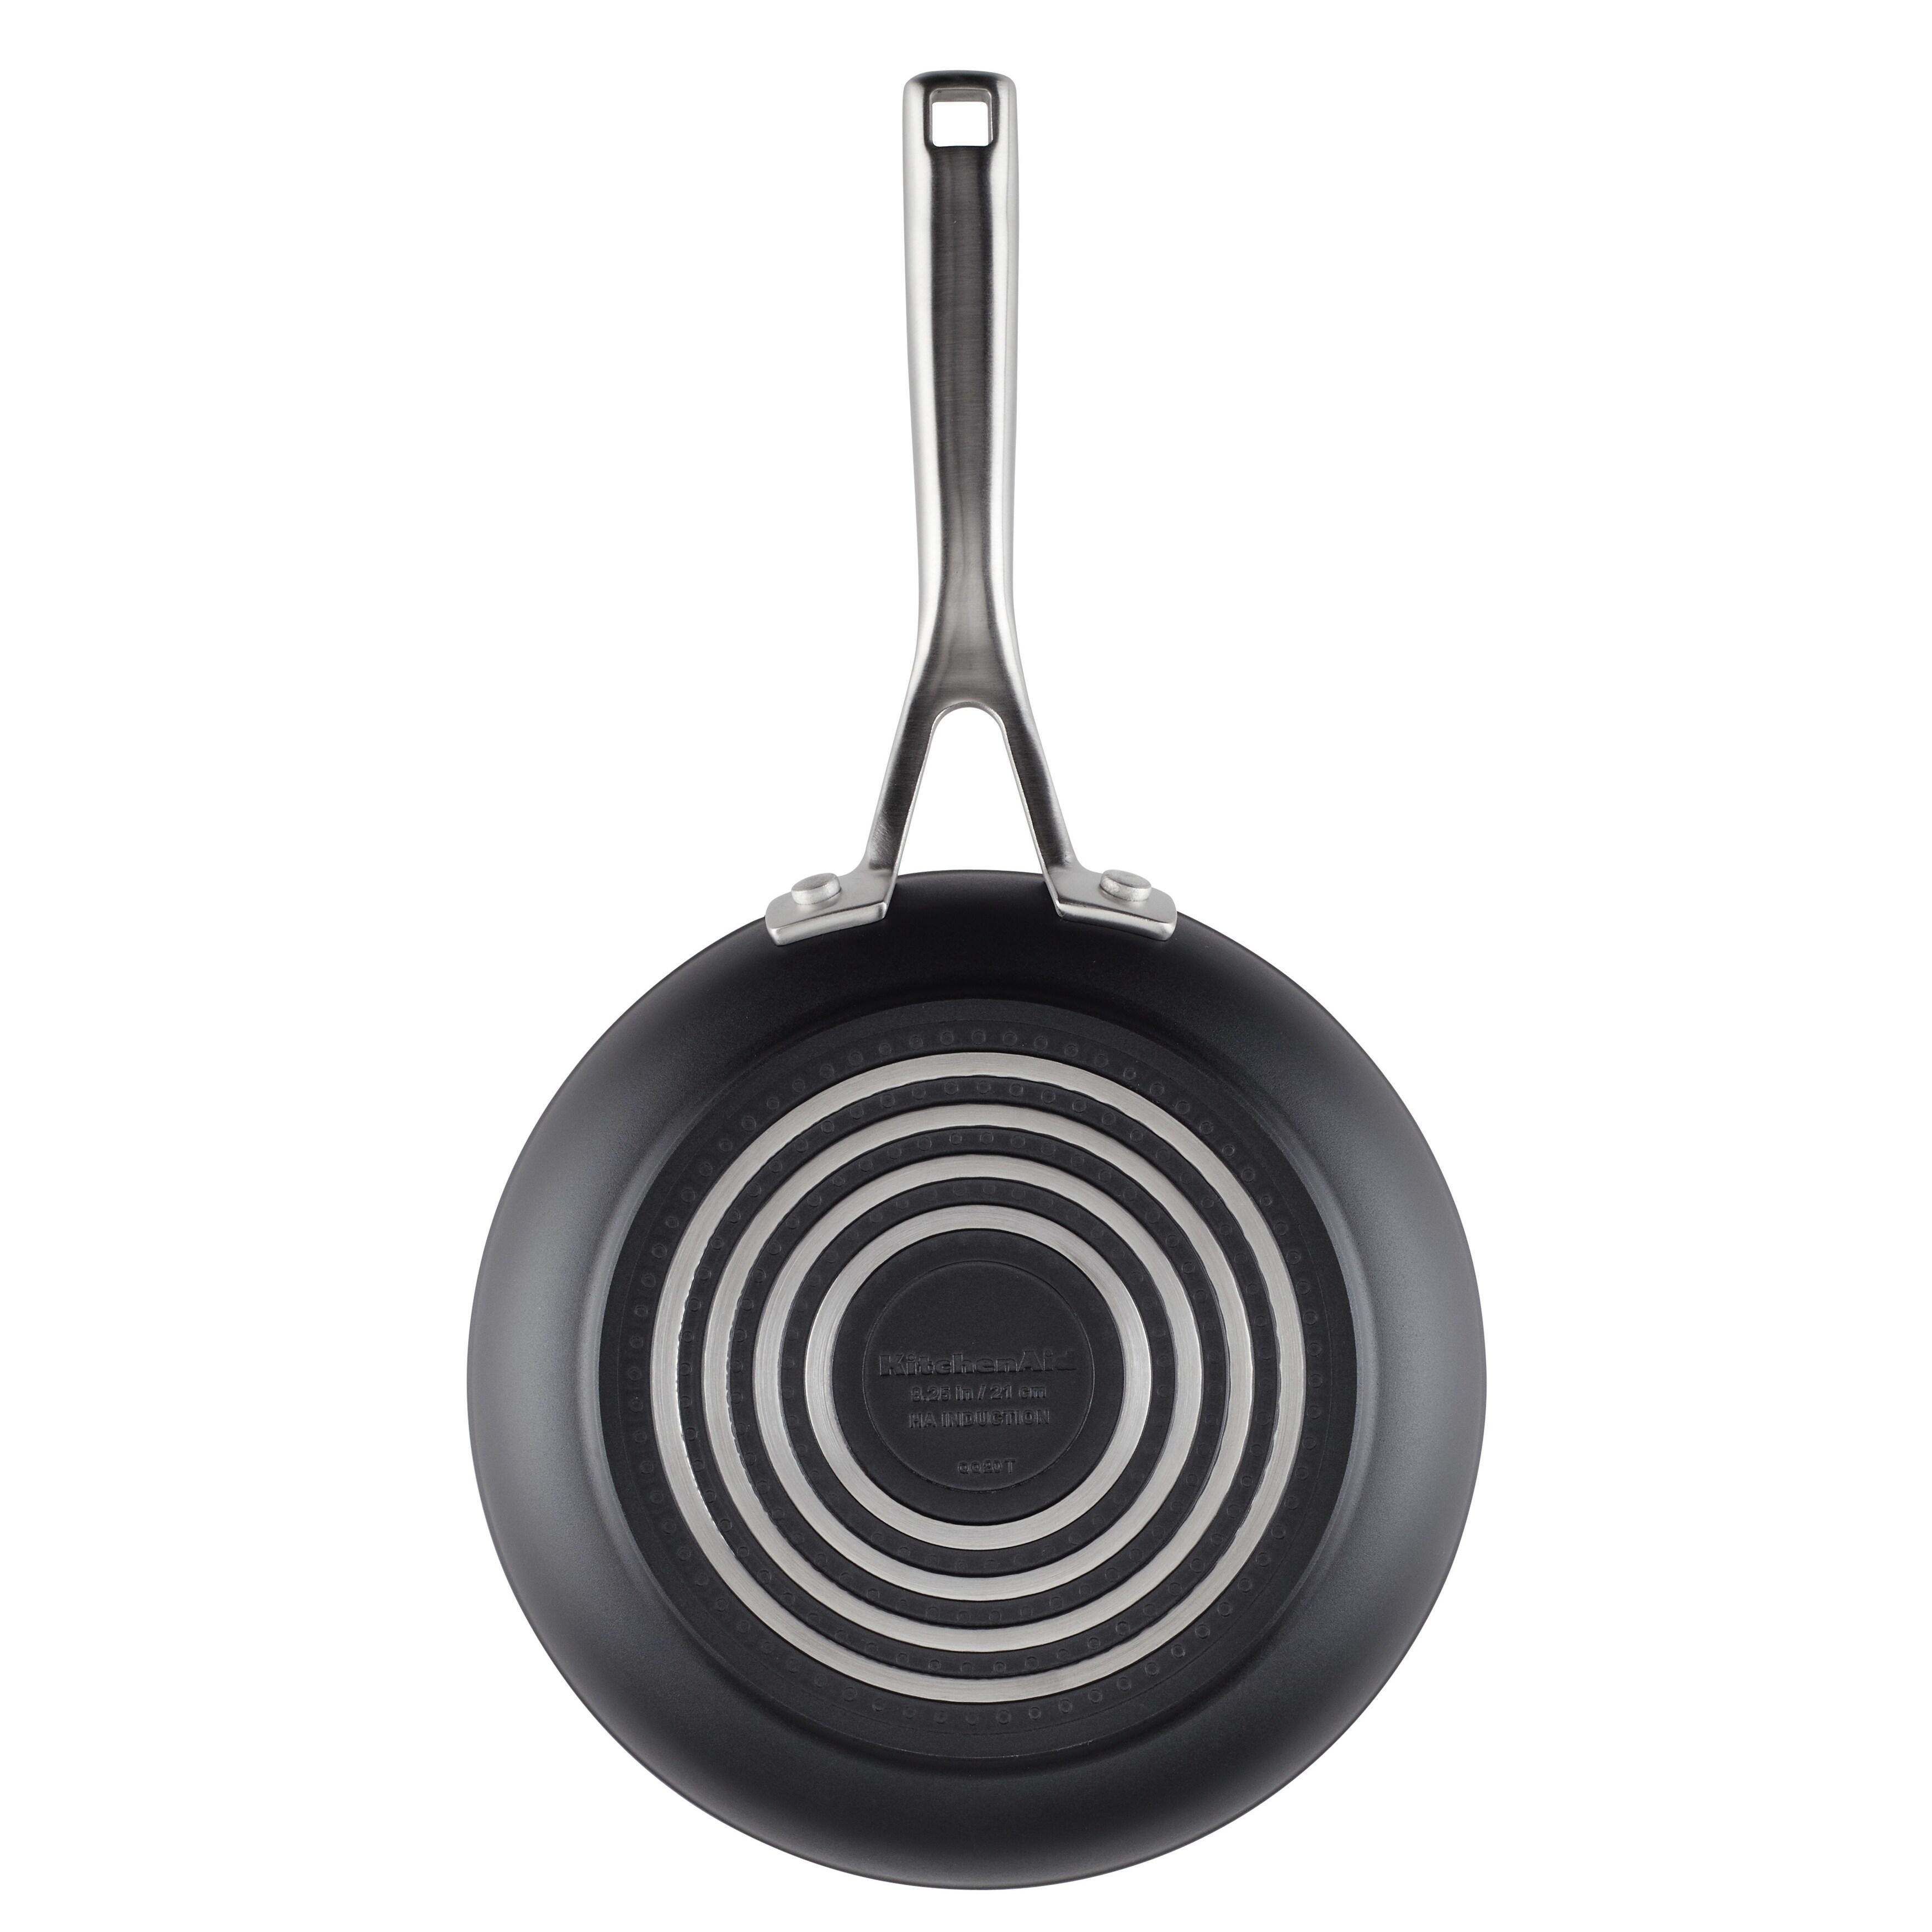 https://ak1.ostkcdn.com/images/products/is/images/direct/9a6c5e2f766f165ab852a2bd691a4d5e13fe94cc/KitchenAid-Hard-Anodized-Induction-Nonstick-Frying-Pan%2C-8.25-Inch%2C-Matte-Black.jpg